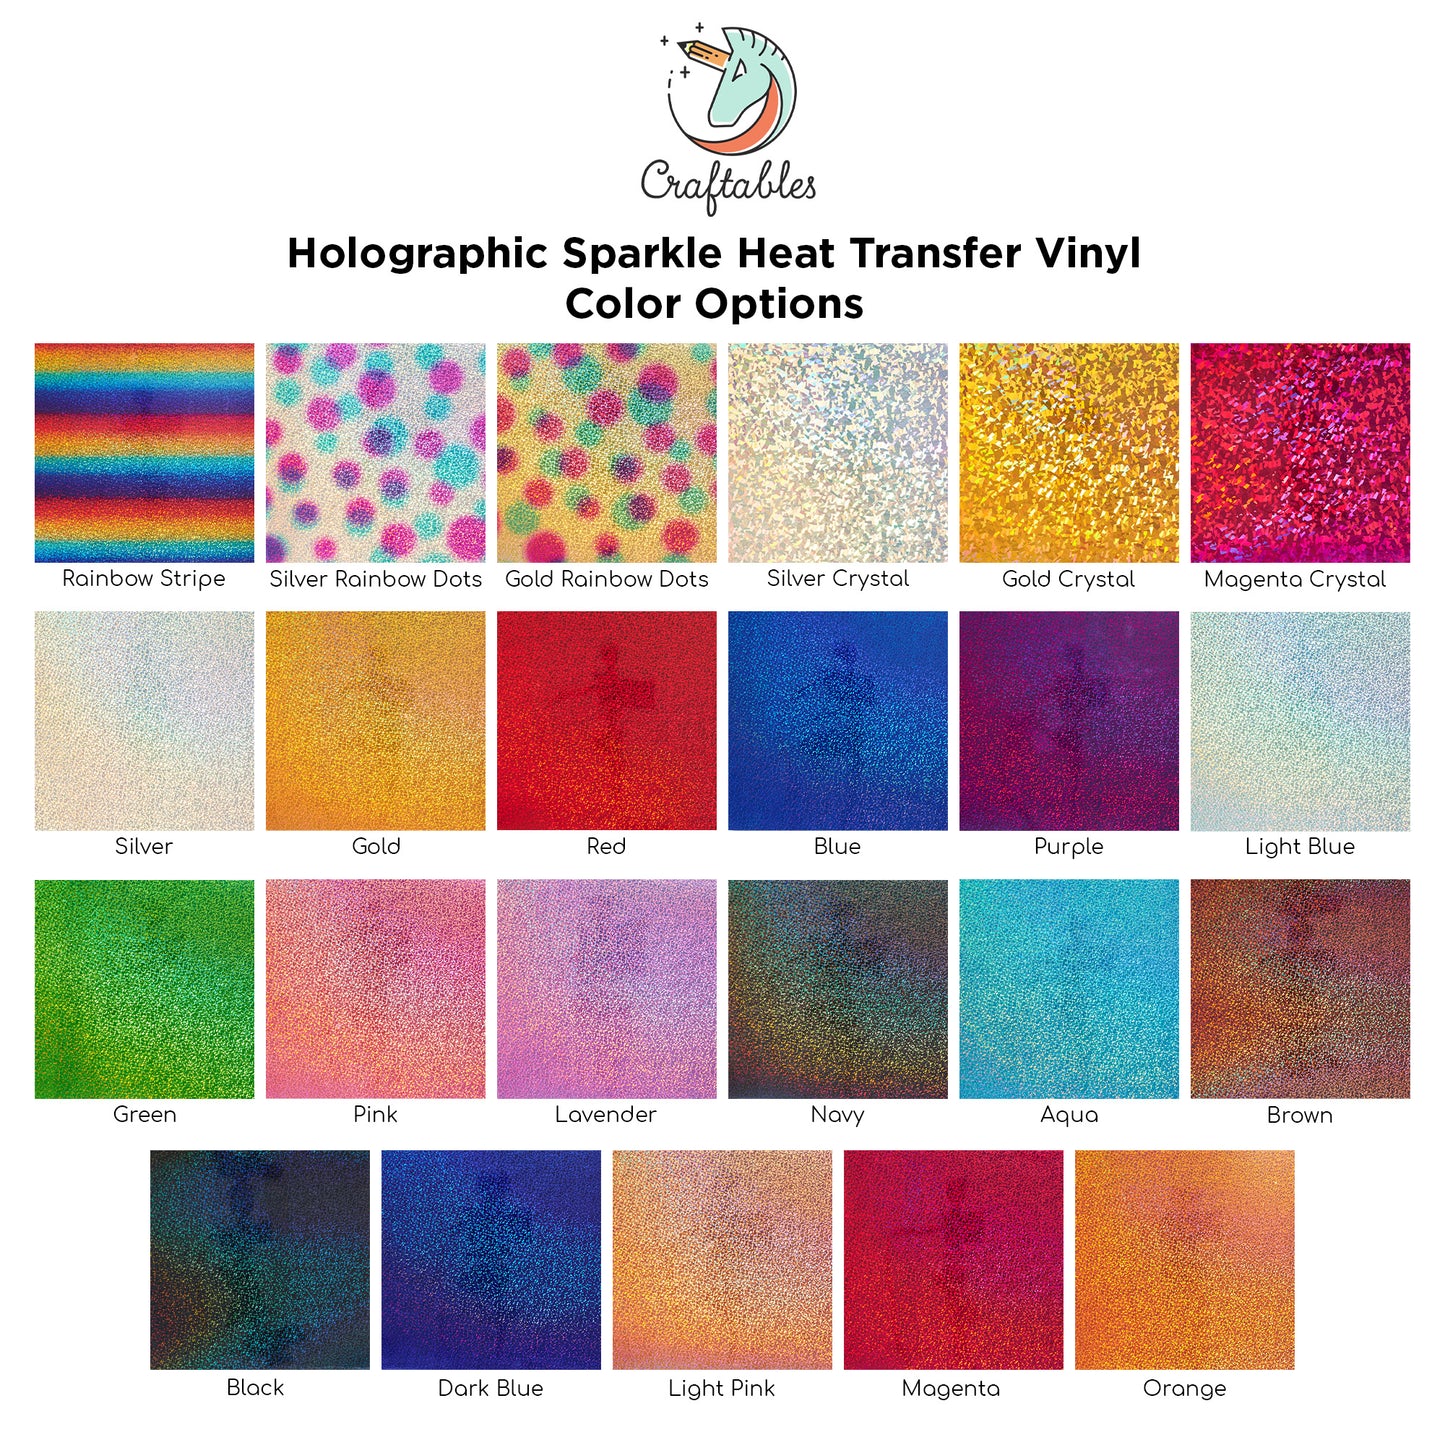 Navy Holographic Sparkle Heat Transfer Vinyl Sheets By Craftables